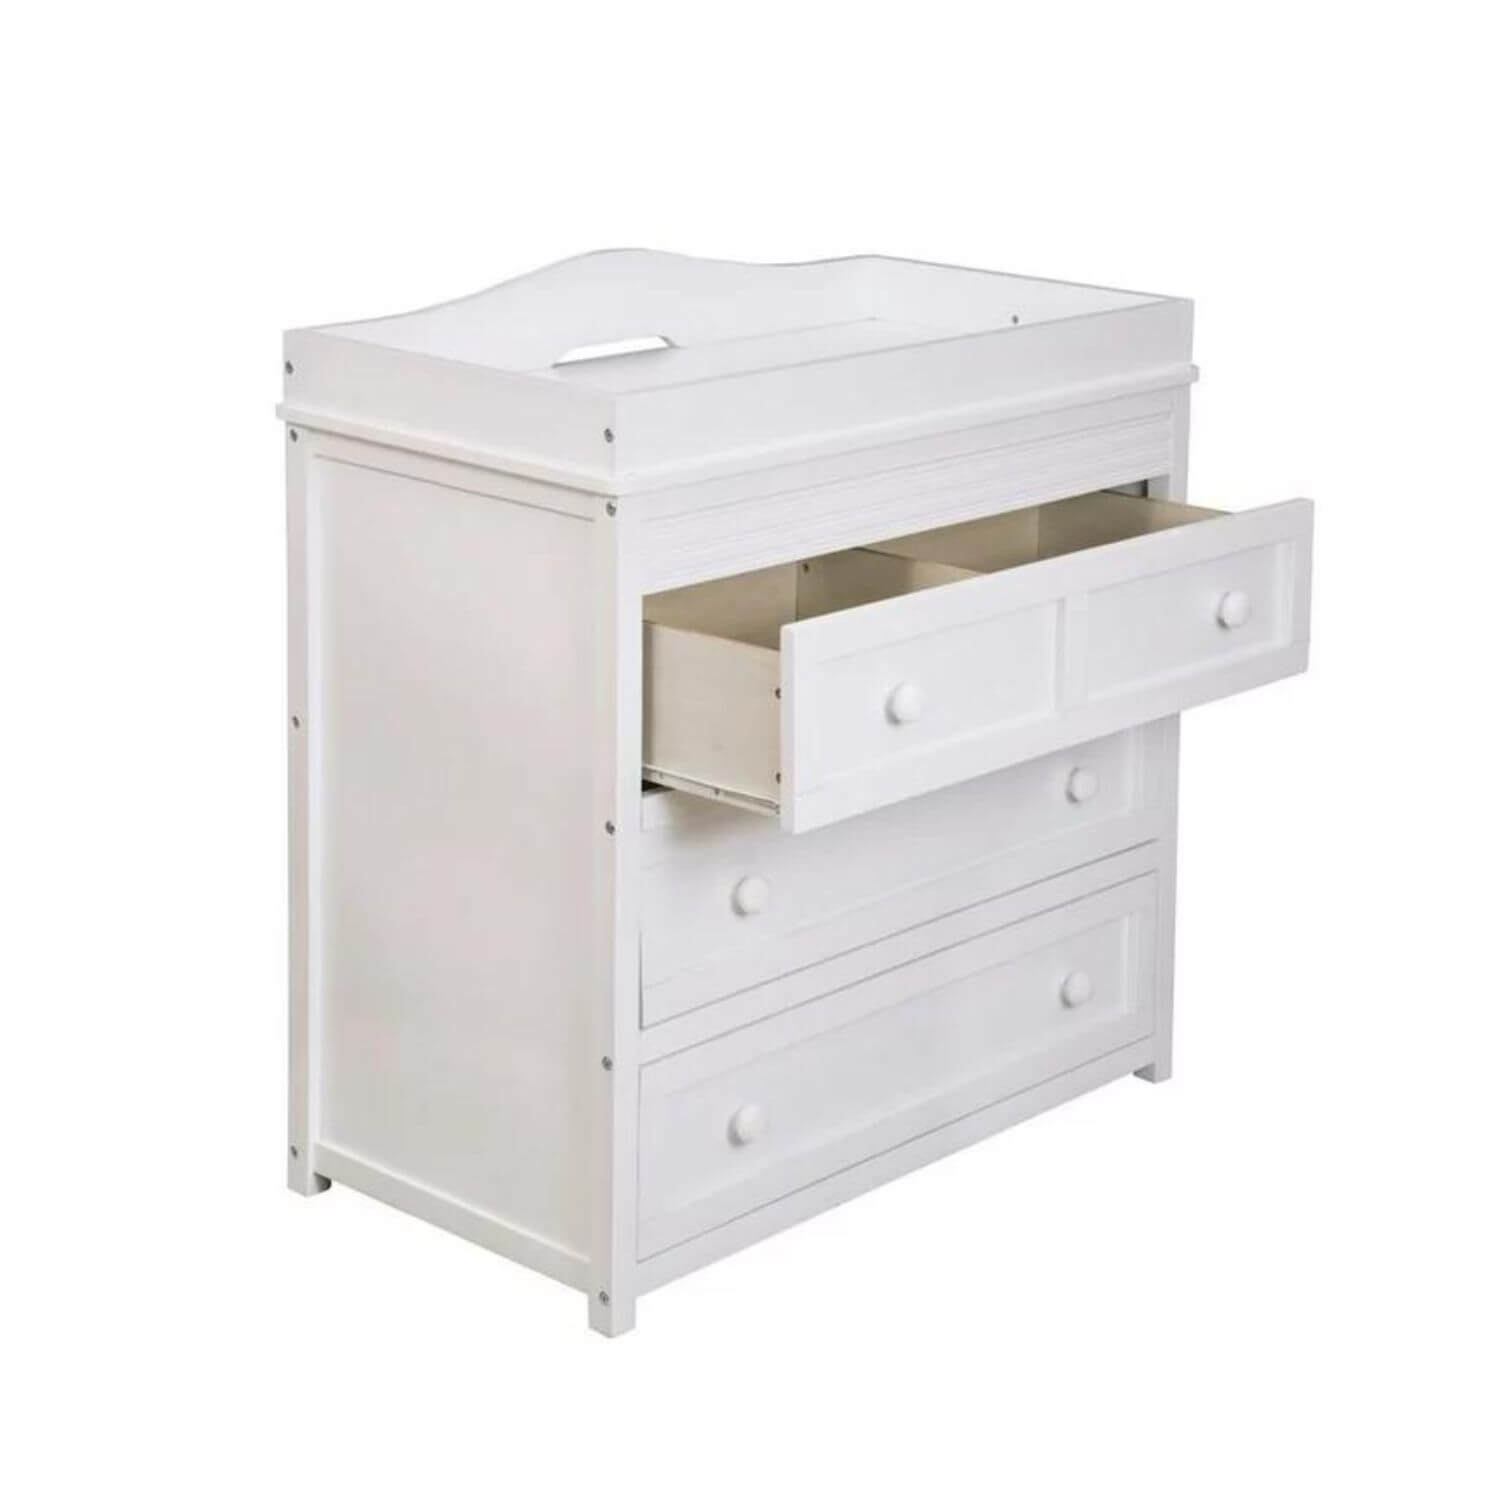 AFG Leila II 3-Drawer Changing Table White